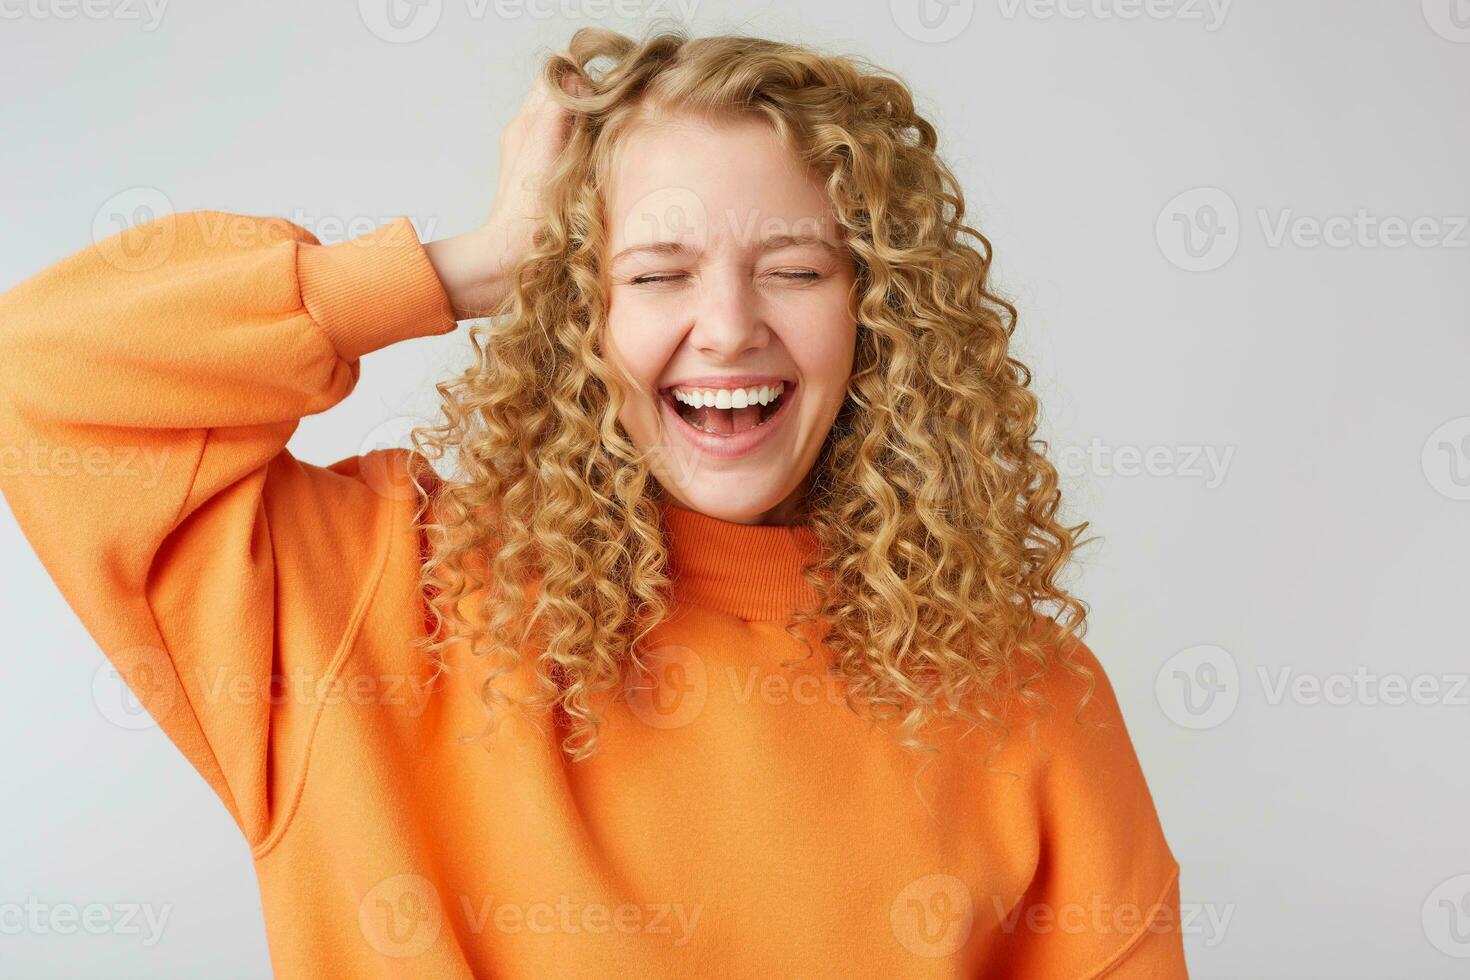 Cheerful carefree joyful curly-haired blonde holds her hand near head closed her eyes from pleasure, laughs happily, dressed in a warm orange oversize sweater, isolated on white background photo